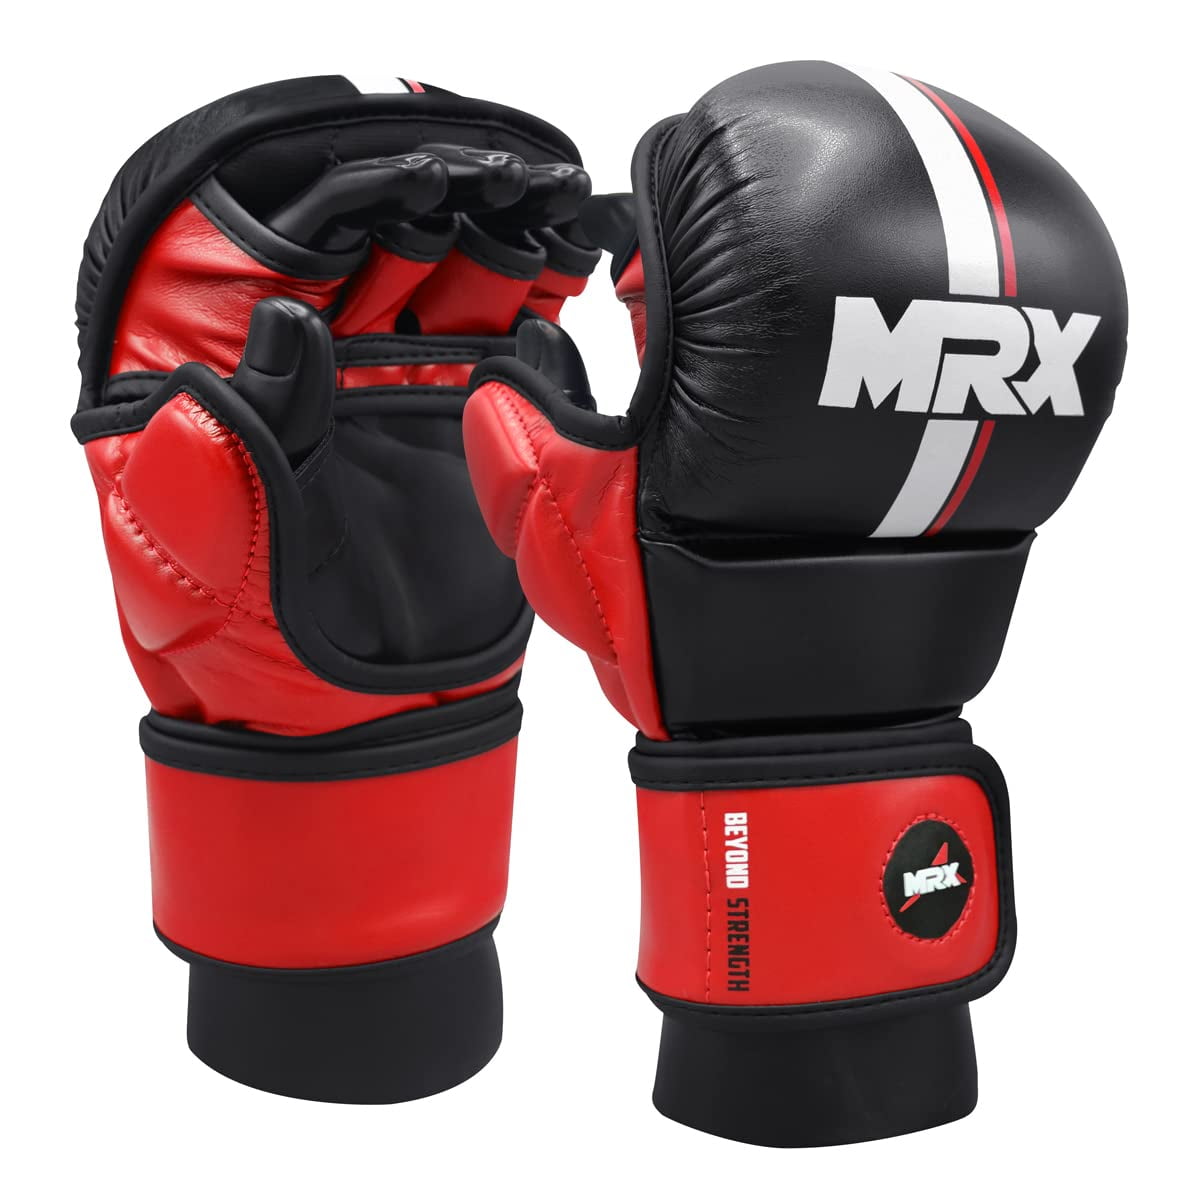 MMA Boxing Glove Grappling Punching Bag Martial Arts Muay Thai Sparring 